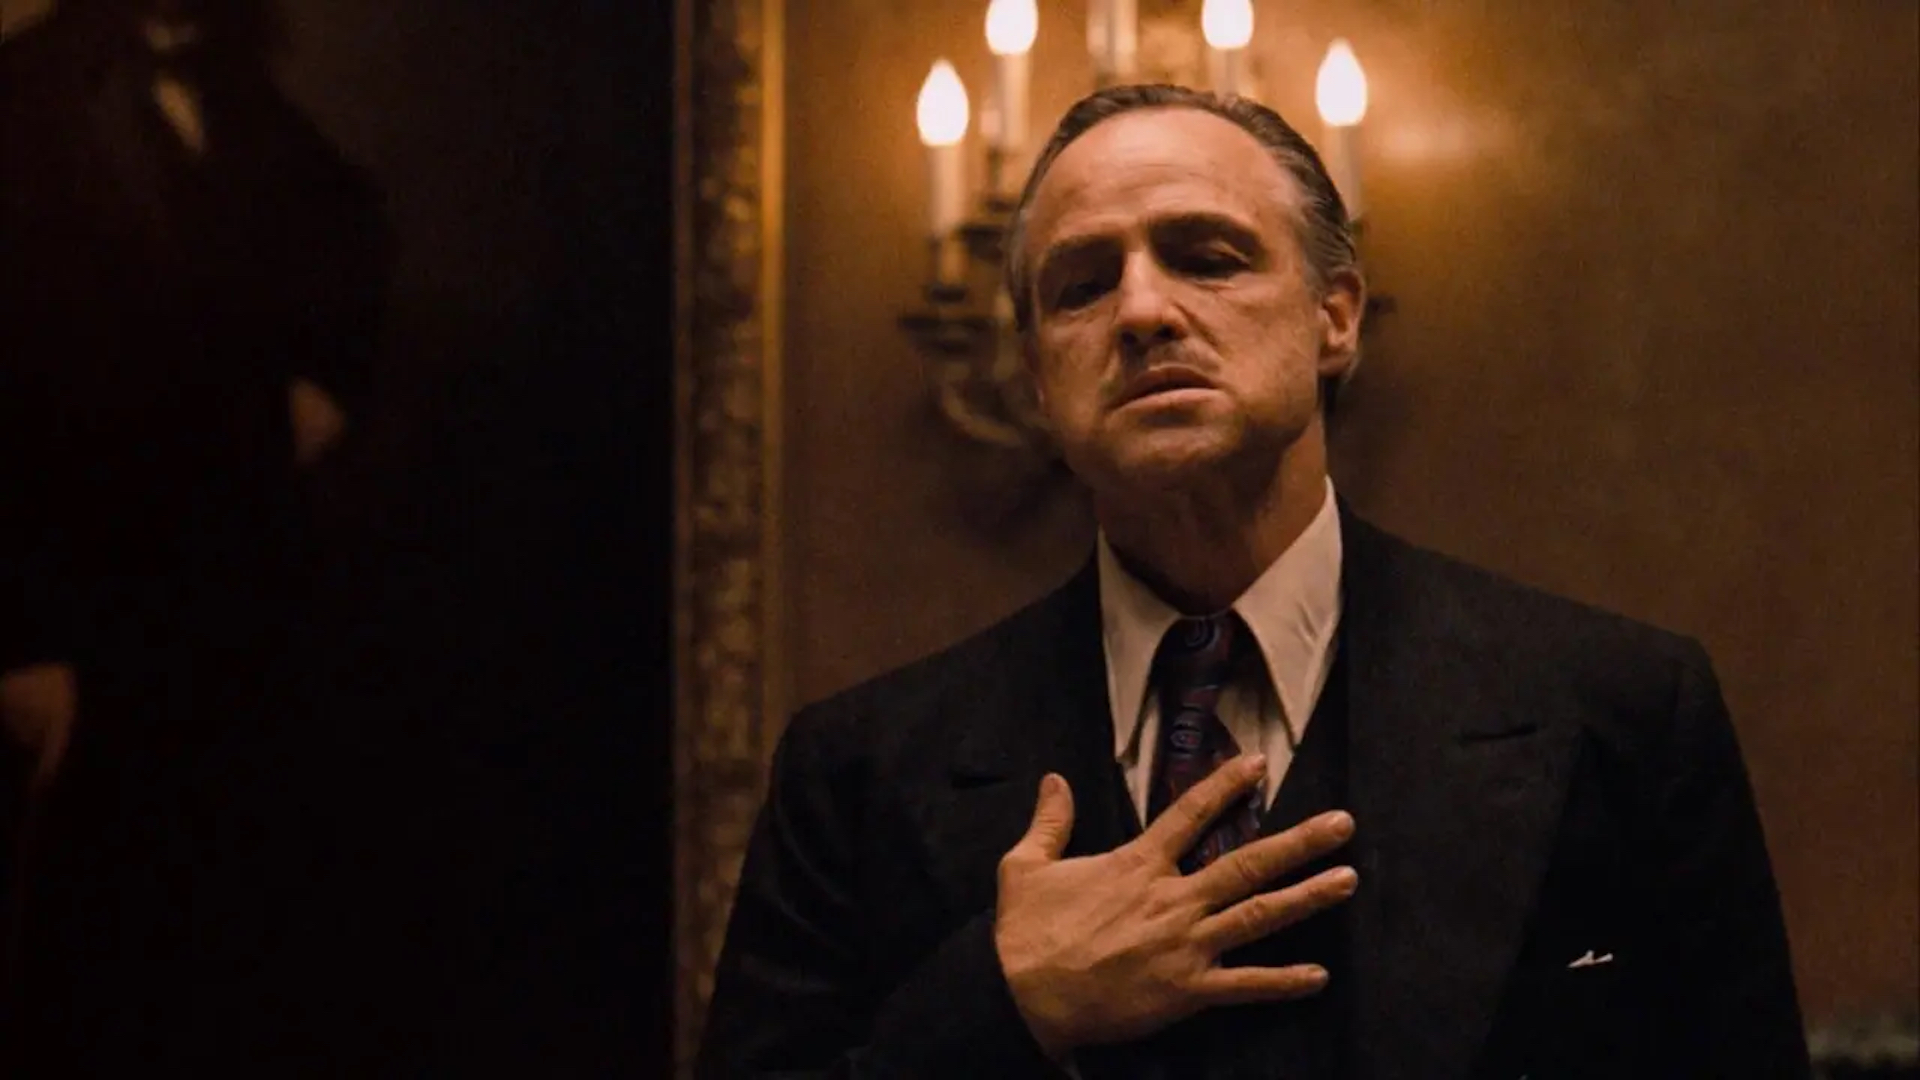 The continuing relevance of the Godfather Trilogy